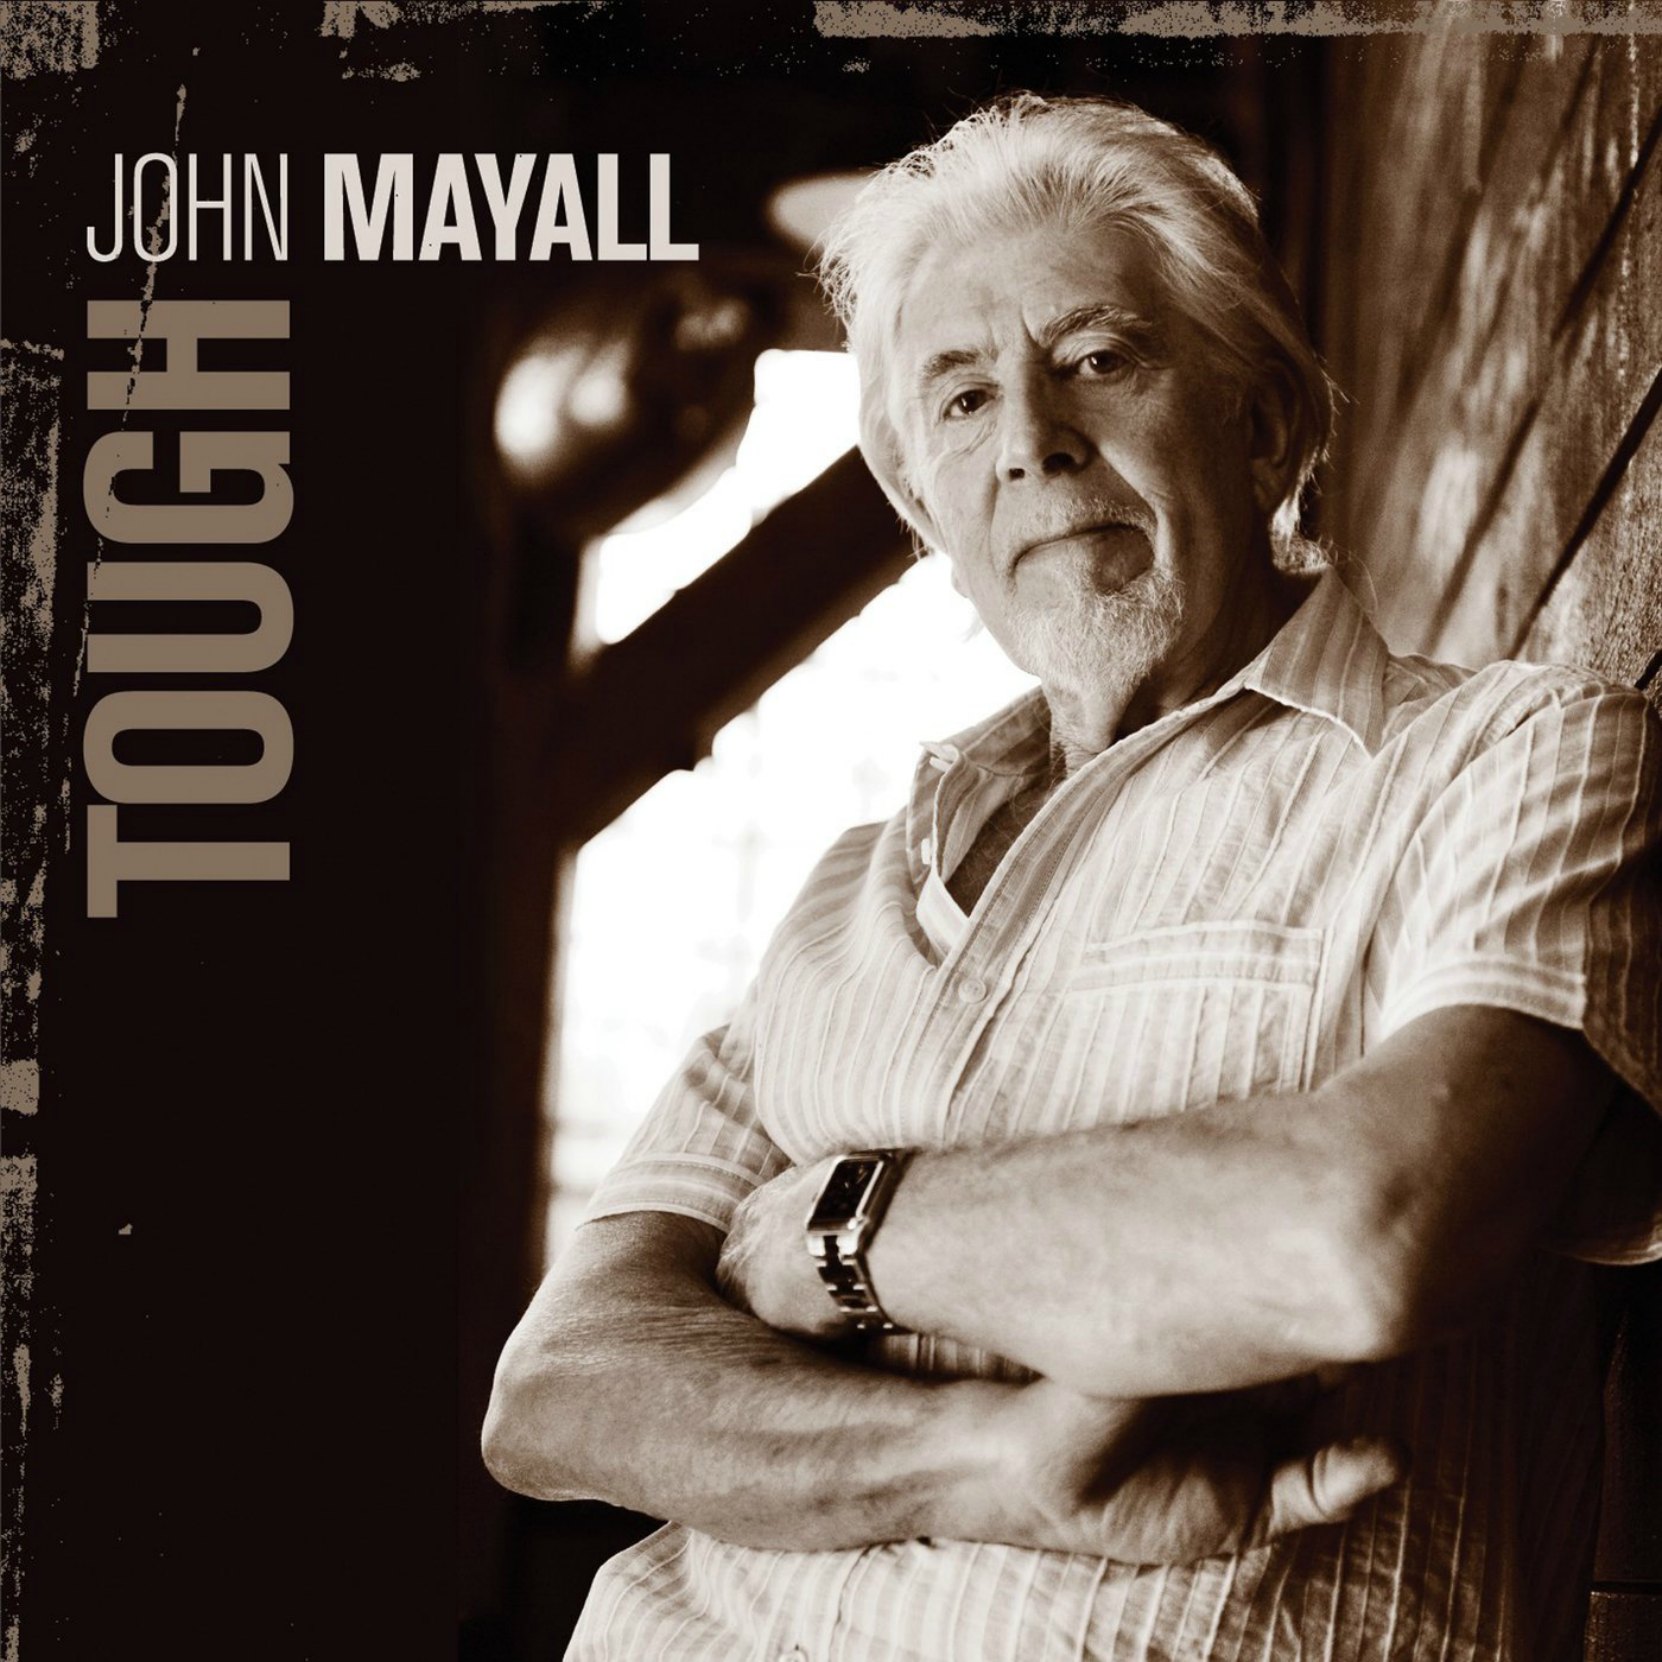 Album cover, John Mayall, Tough, released in 2009